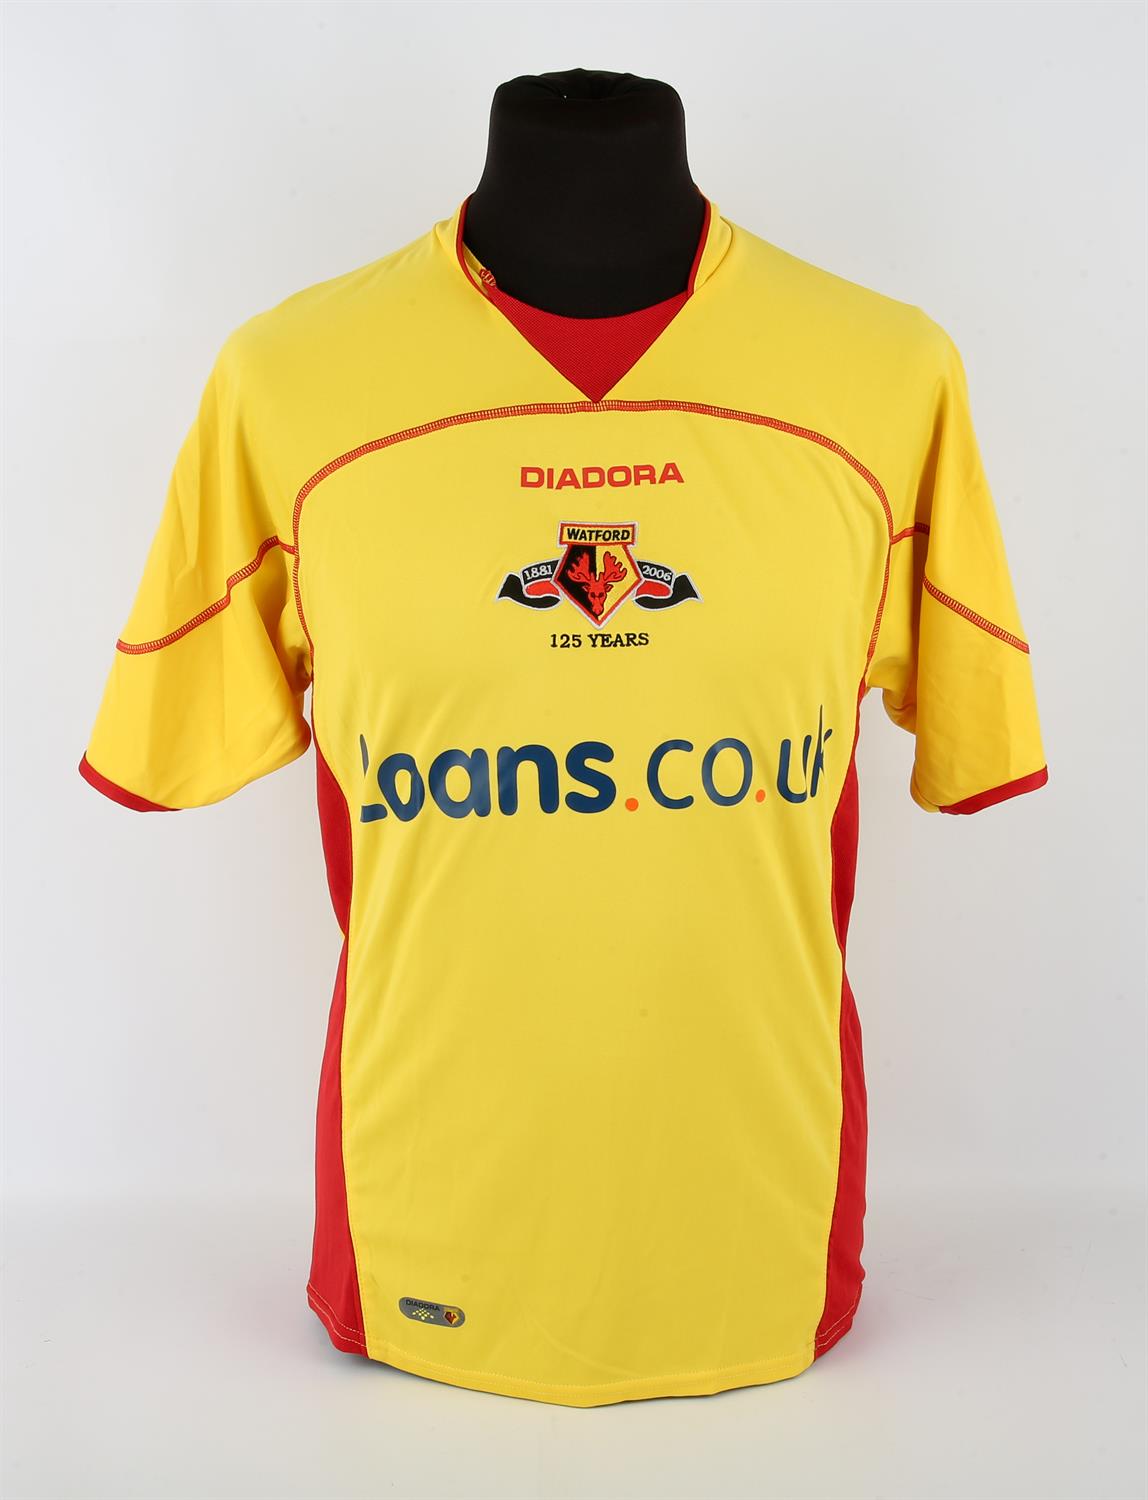 Watford Football club, Young (No.15) 125th Anniversary shirt from 2006-2007, S/S. - Image 2 of 2